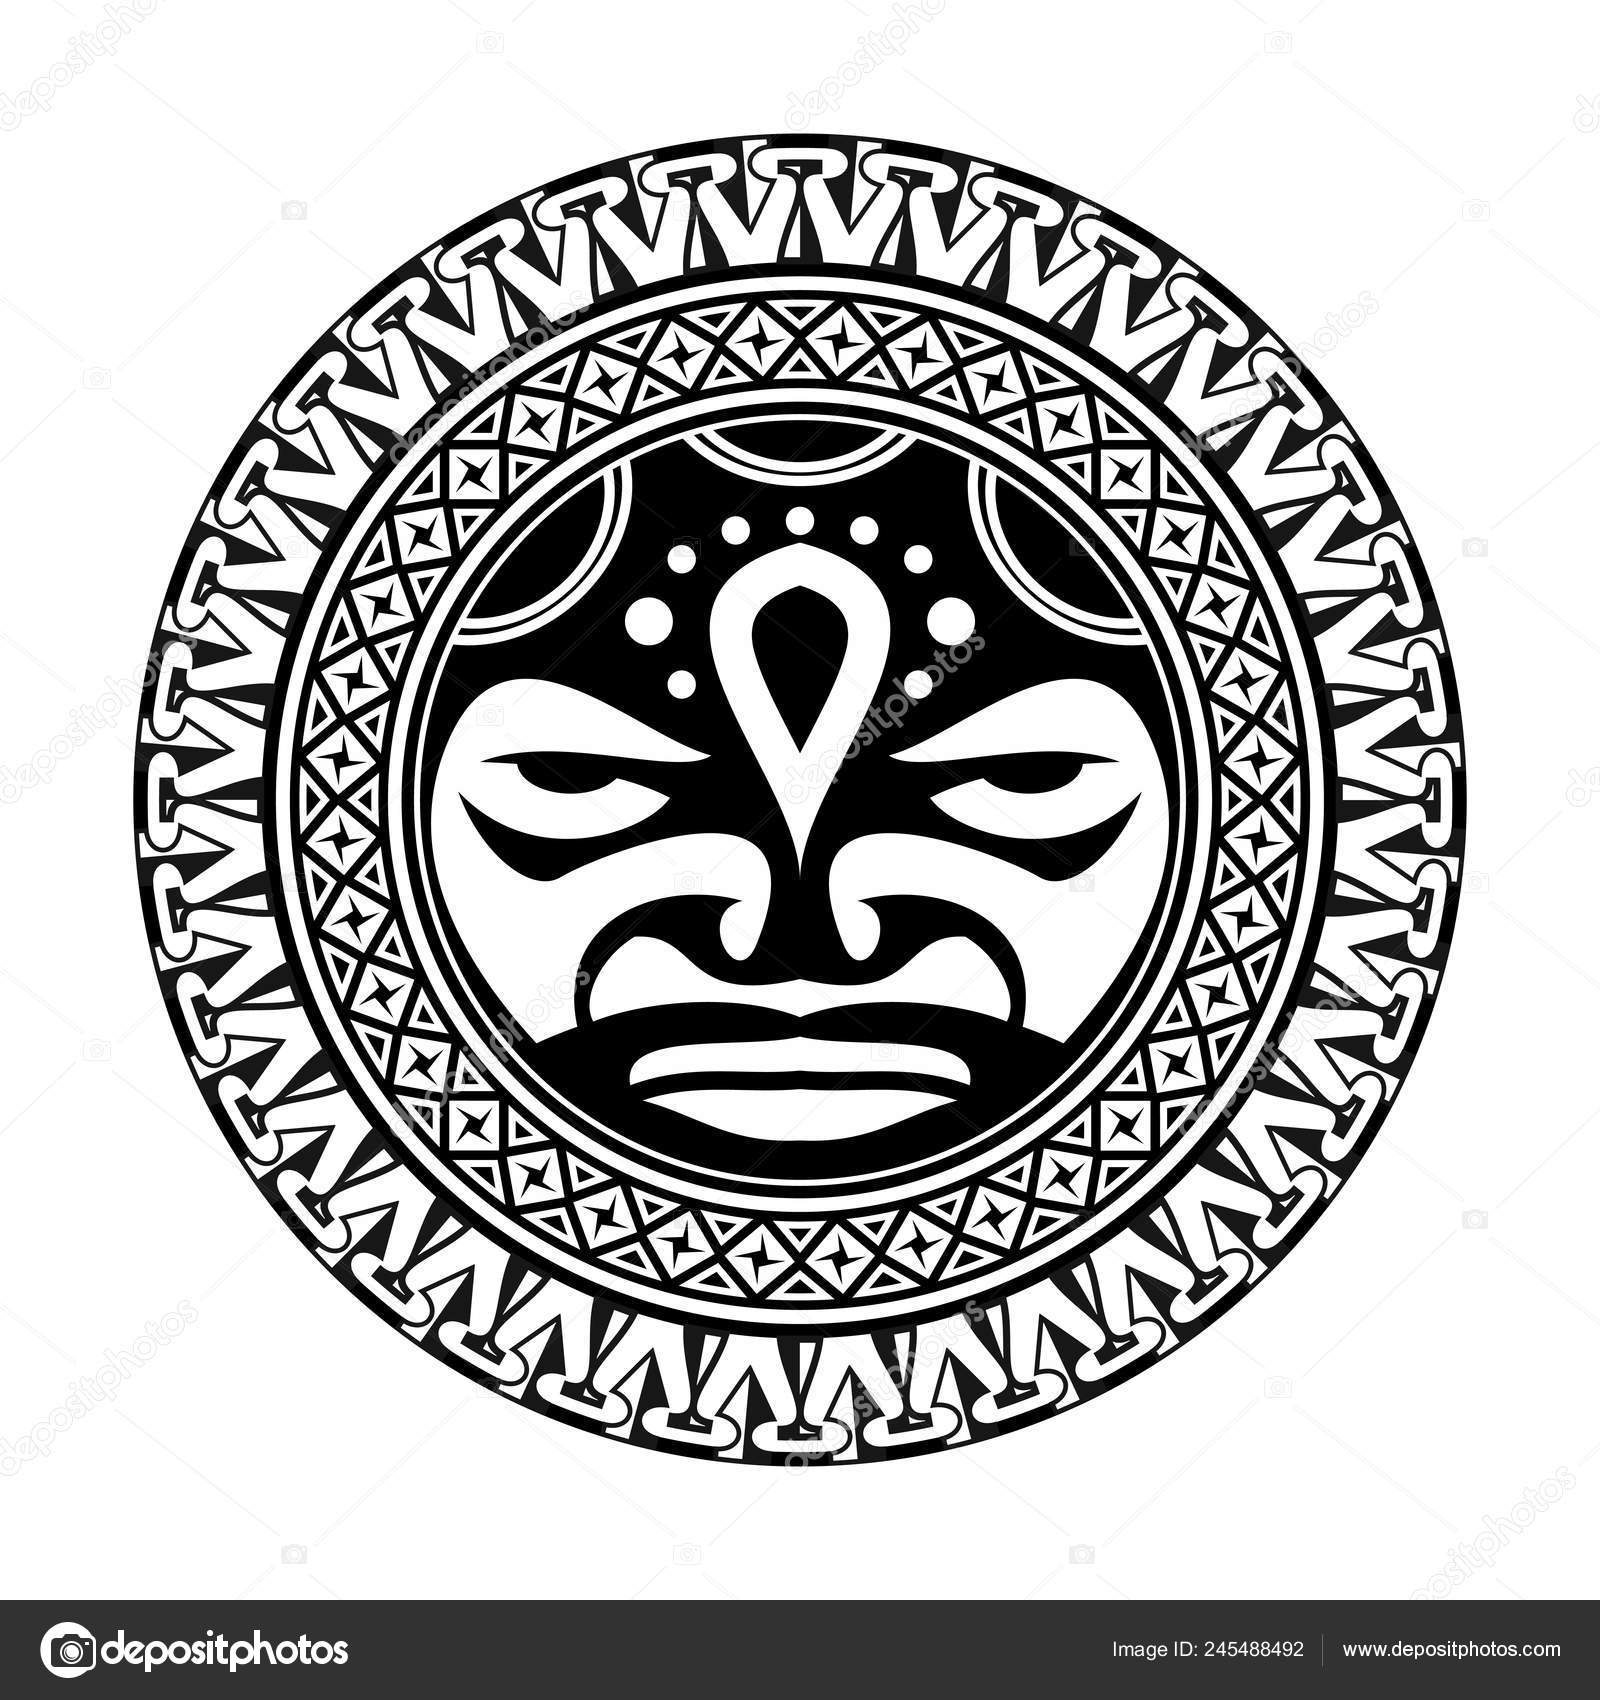 450 Cancer Tribal Tattoo Images, Stock Photos & Vectors | Shutterstock